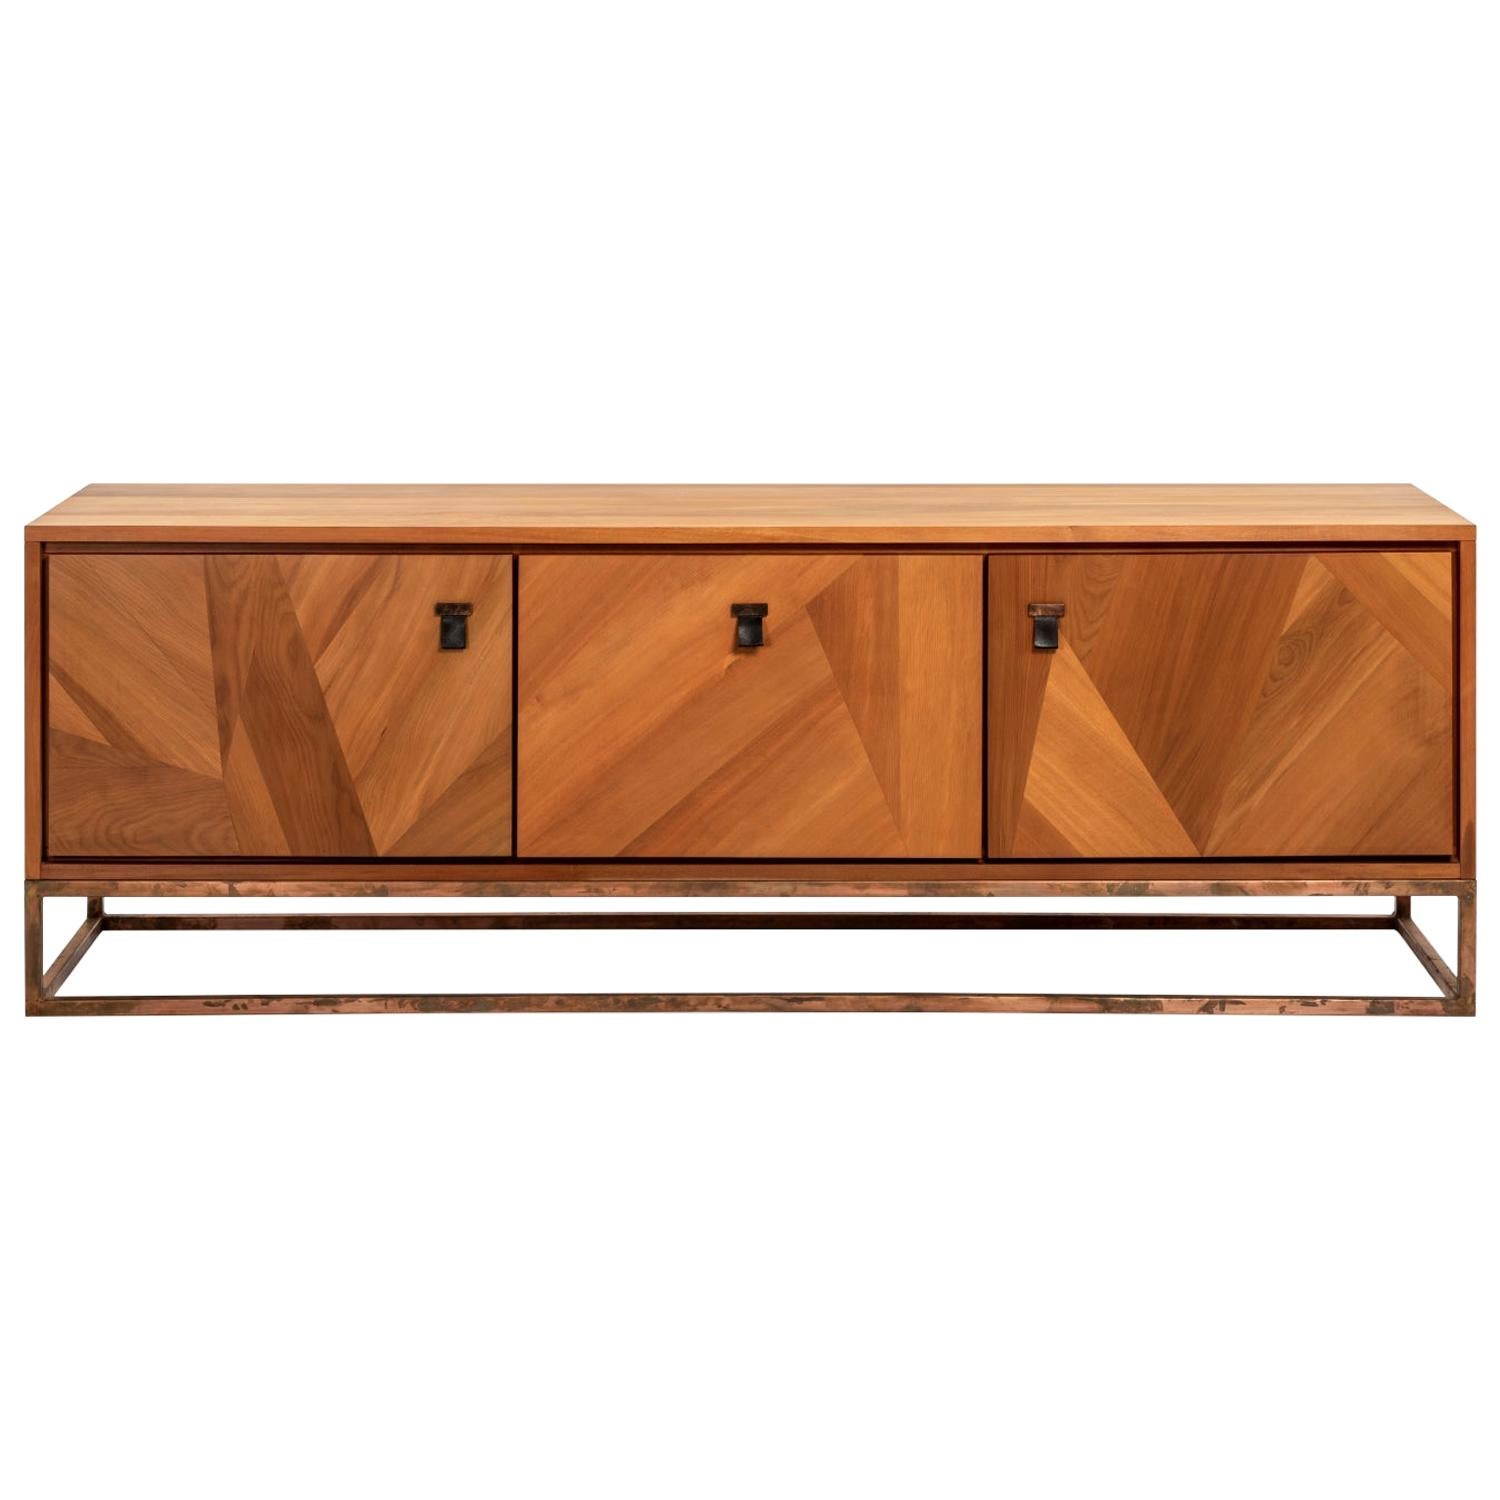 Haast Modern Ancient River Wood Credenza Aged Copper Base and Leather Handles